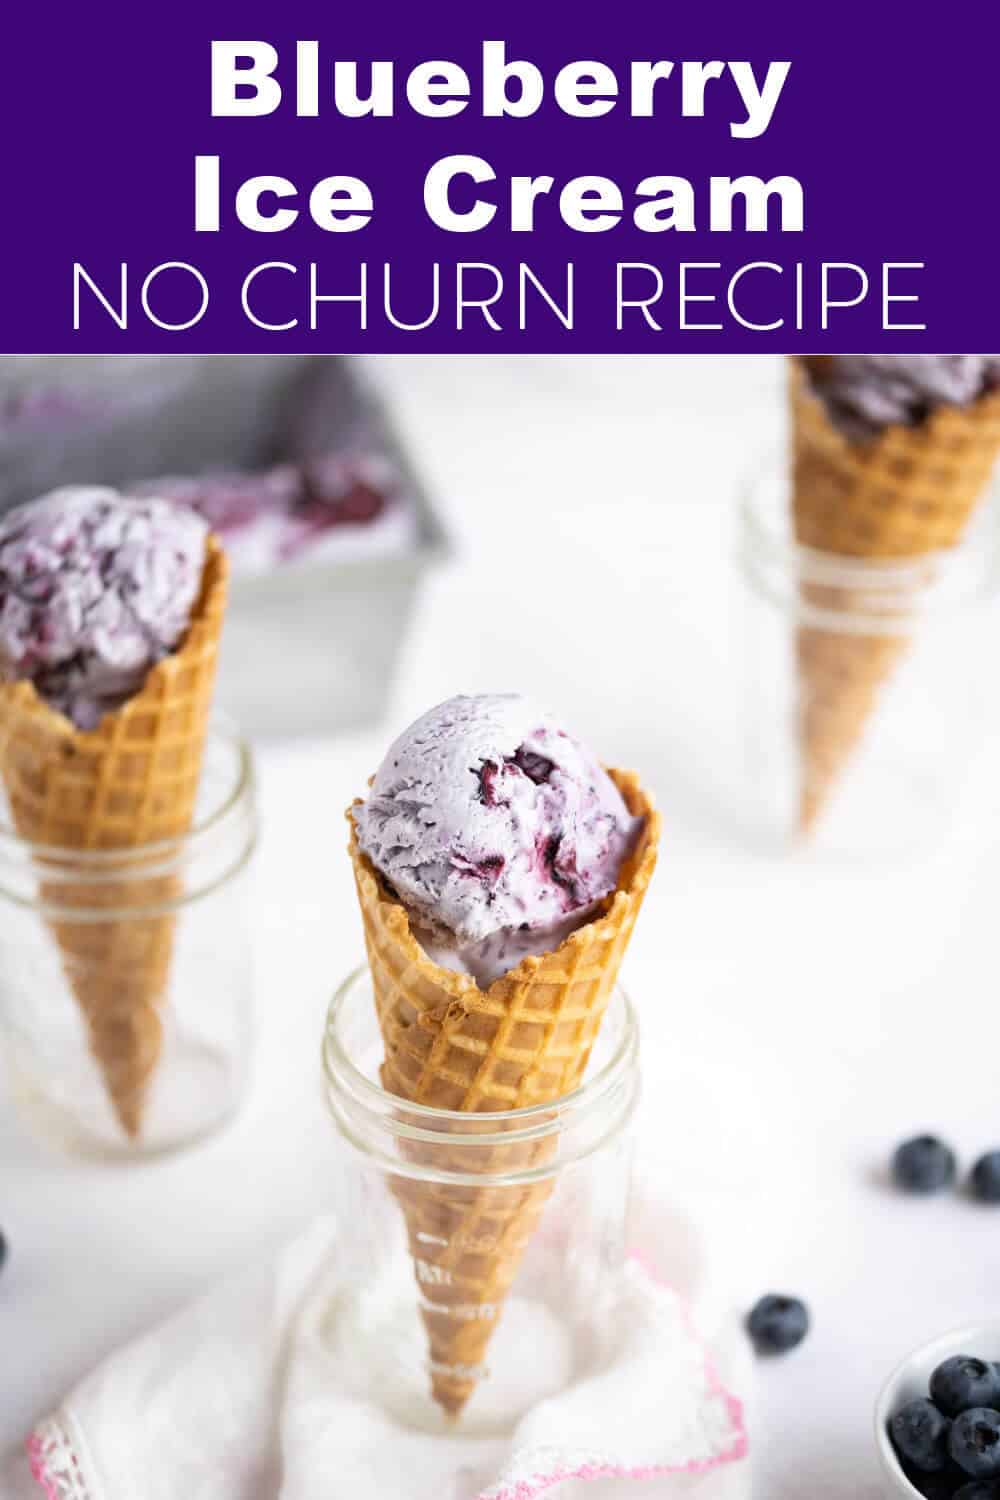 Loaded with a perfect confection of plump, juicy blueberries, this quick and easy no-churn ice cream with blueberries dessert is irresistible. Welcome summertime with a scoop or two of homemade blueberry ice cream. via @artfrommytable